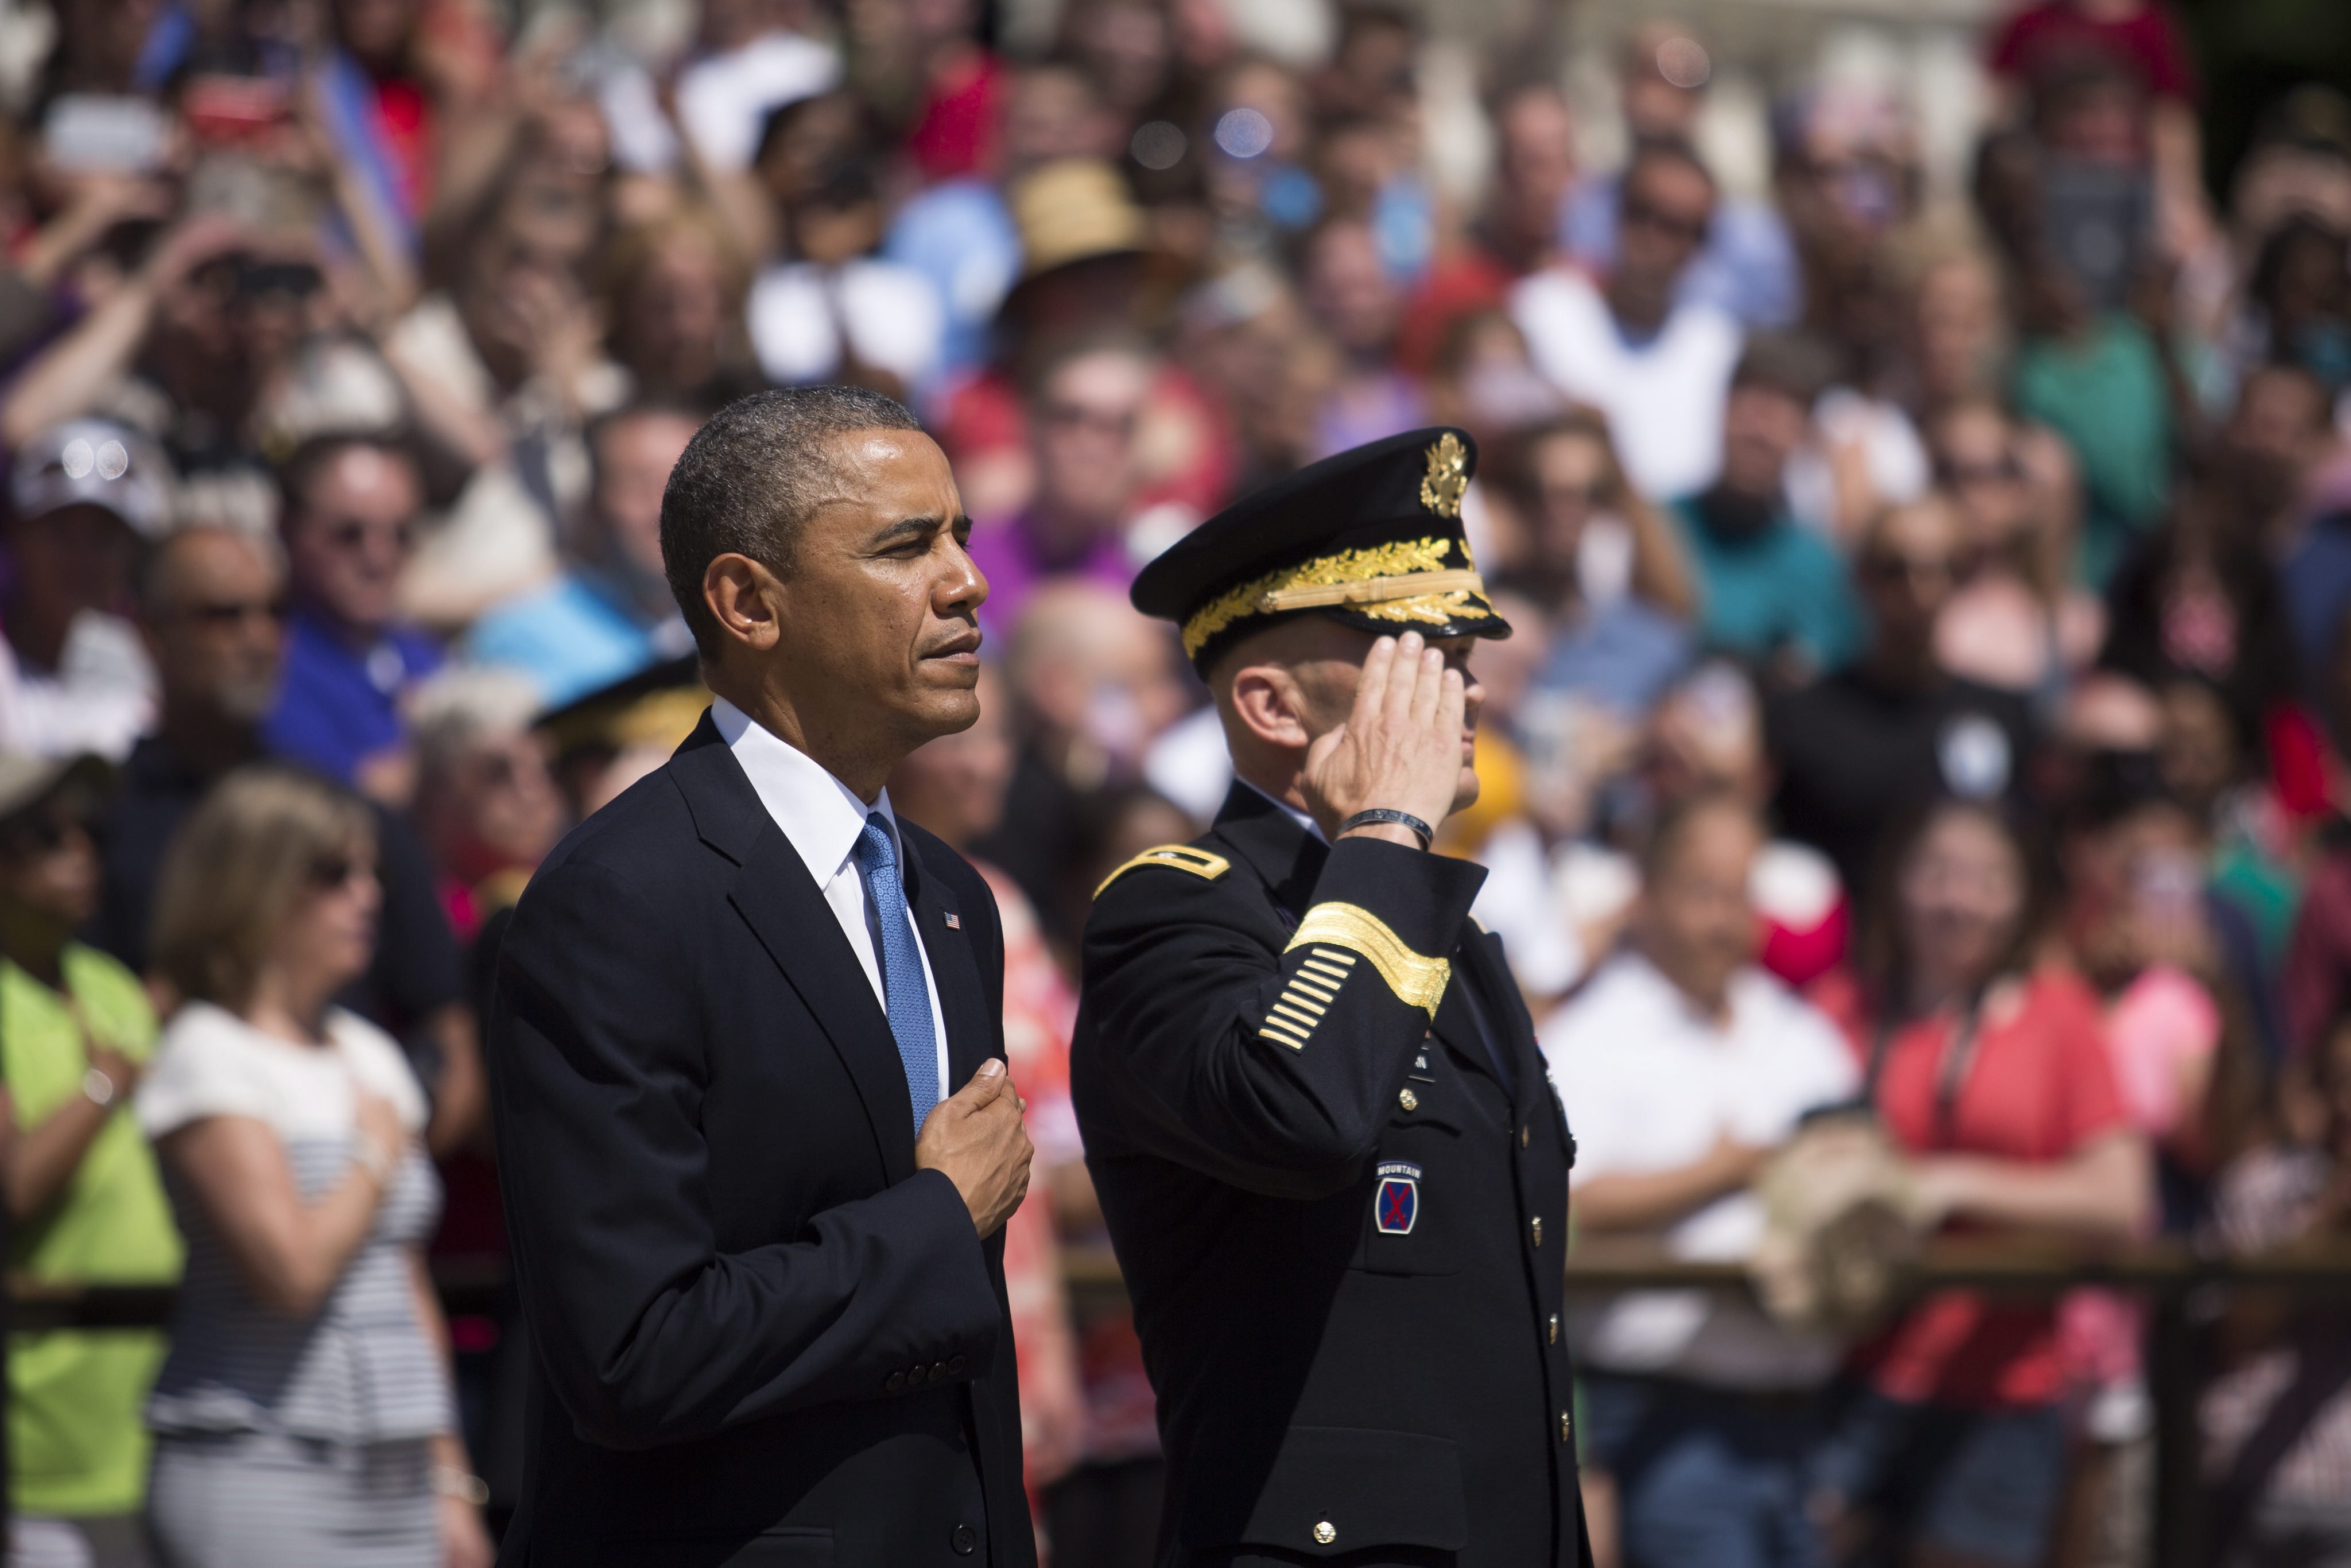 U.S. President Barack Obama and Major General Jeffrey Buchanan participate in a wreath laying ceremony at the Tomb of the Unknown Soldier at Arlington National Cemetery in Arlington, Va. on May 26, 2014. (Drew Angerer—EPA)